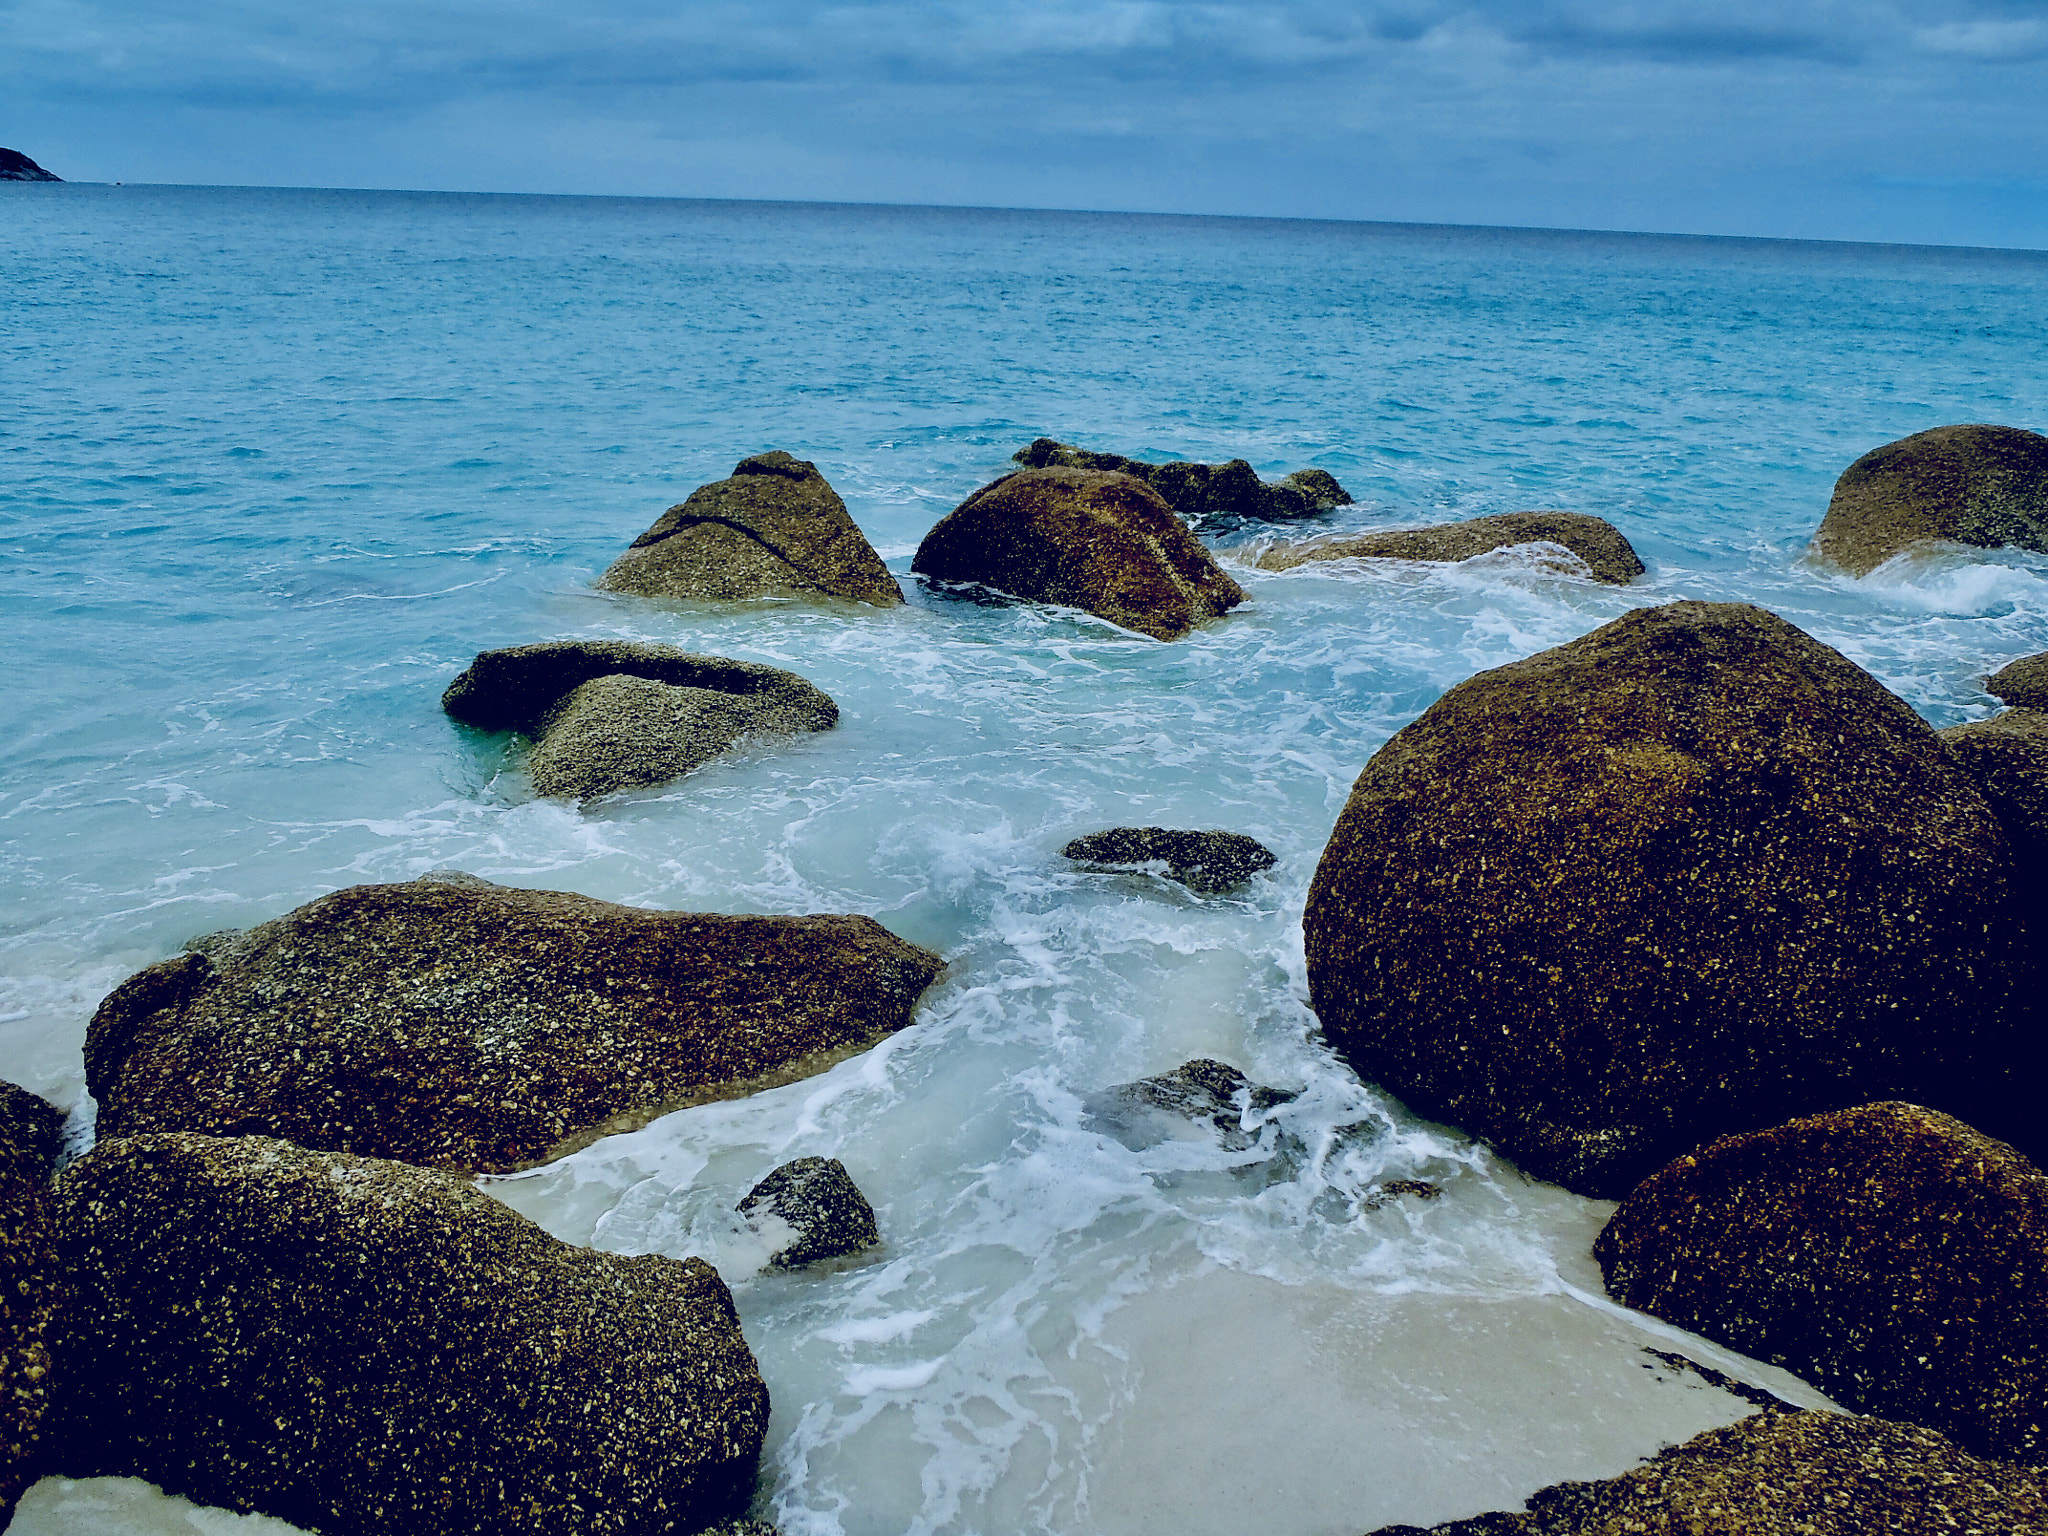 Olympus TG-810 sample photo. Rocks in the ocean photography